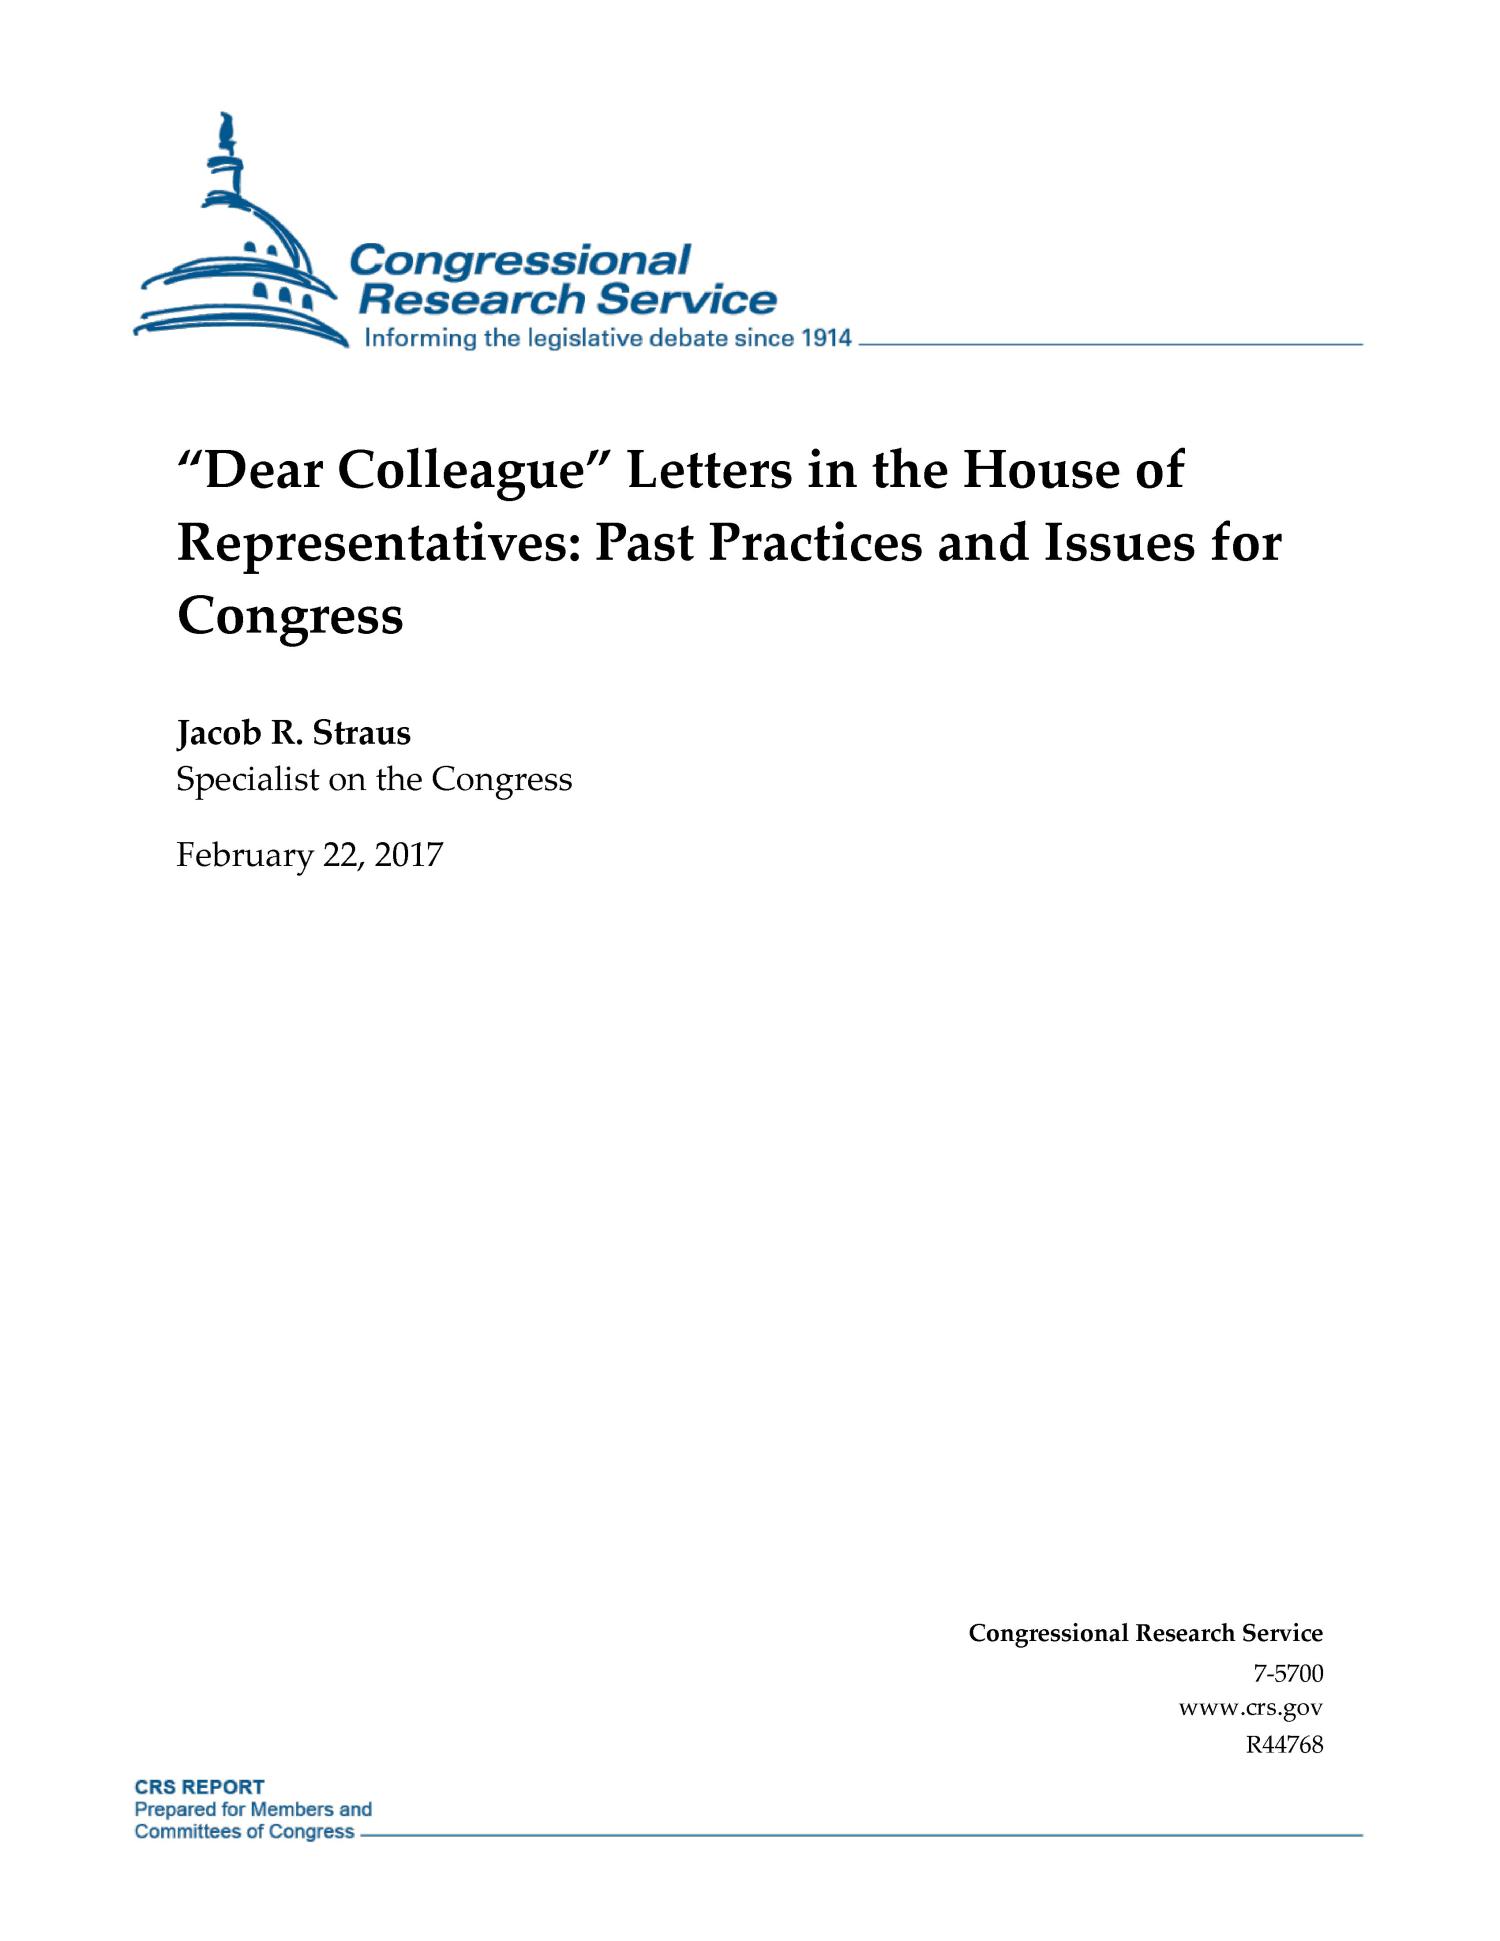 "Dear Colleague" Letters in the House of Representatives Past